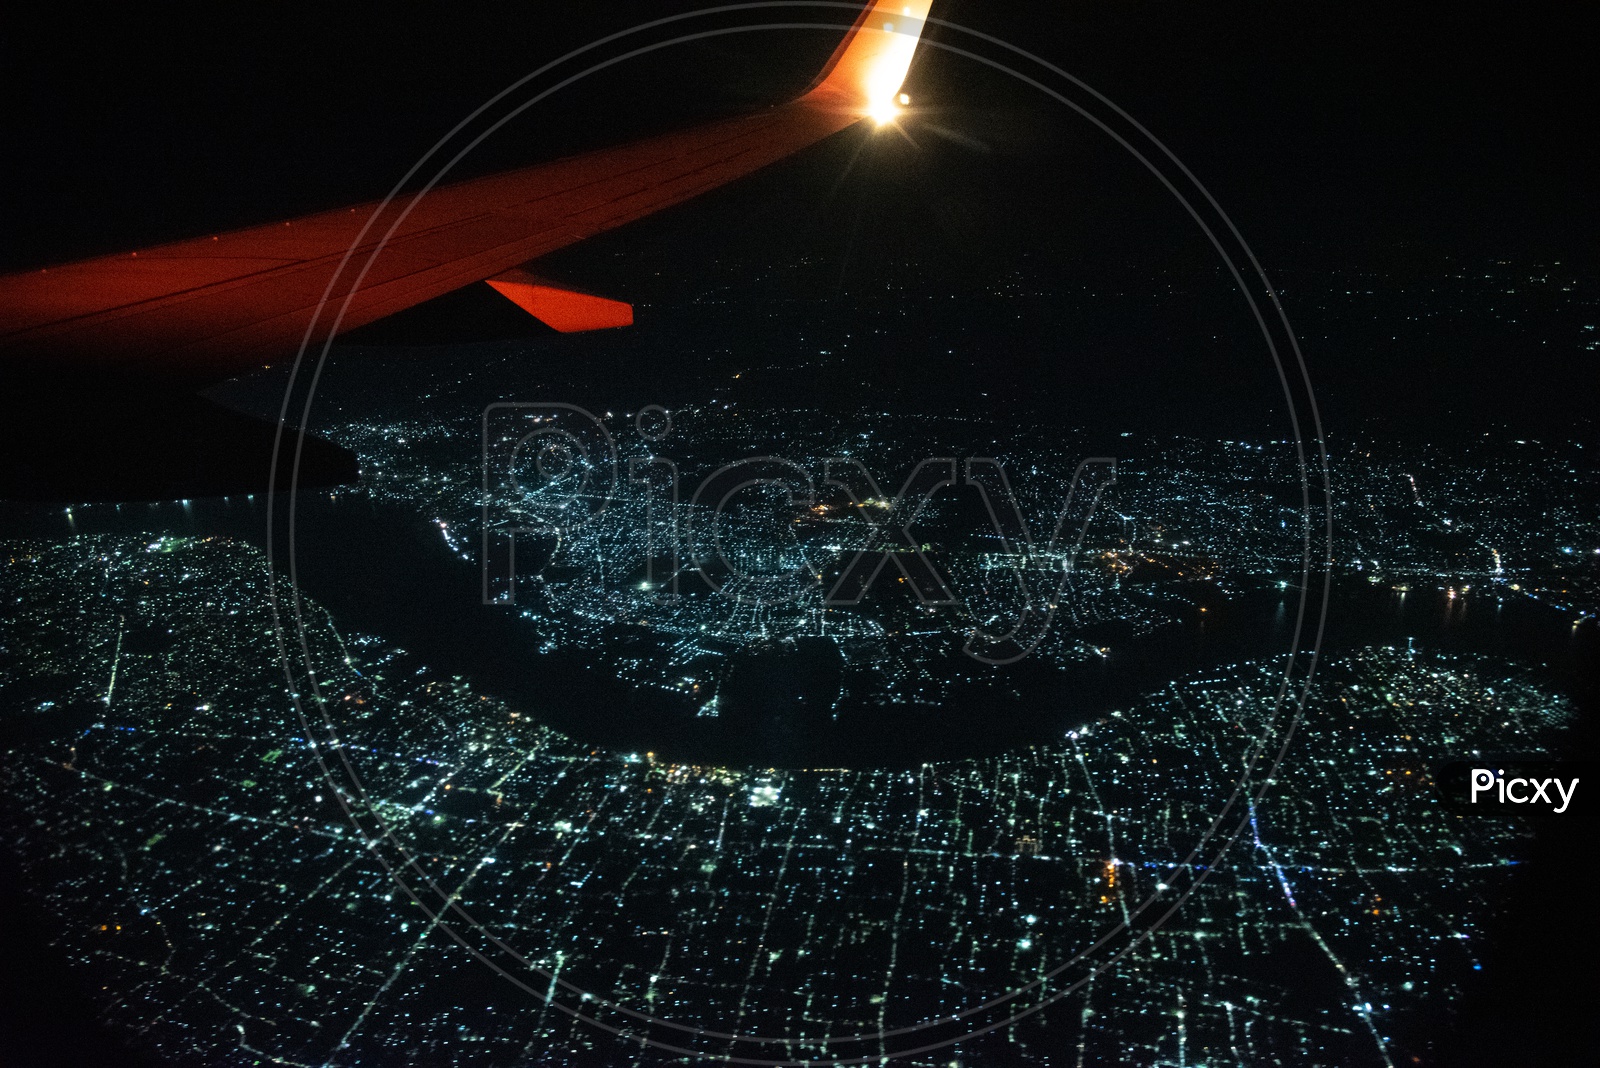 Aerial View Of City Scape Of  Kolkata  And  Kolkata  Roads In Night  Time  From a  Flight Window